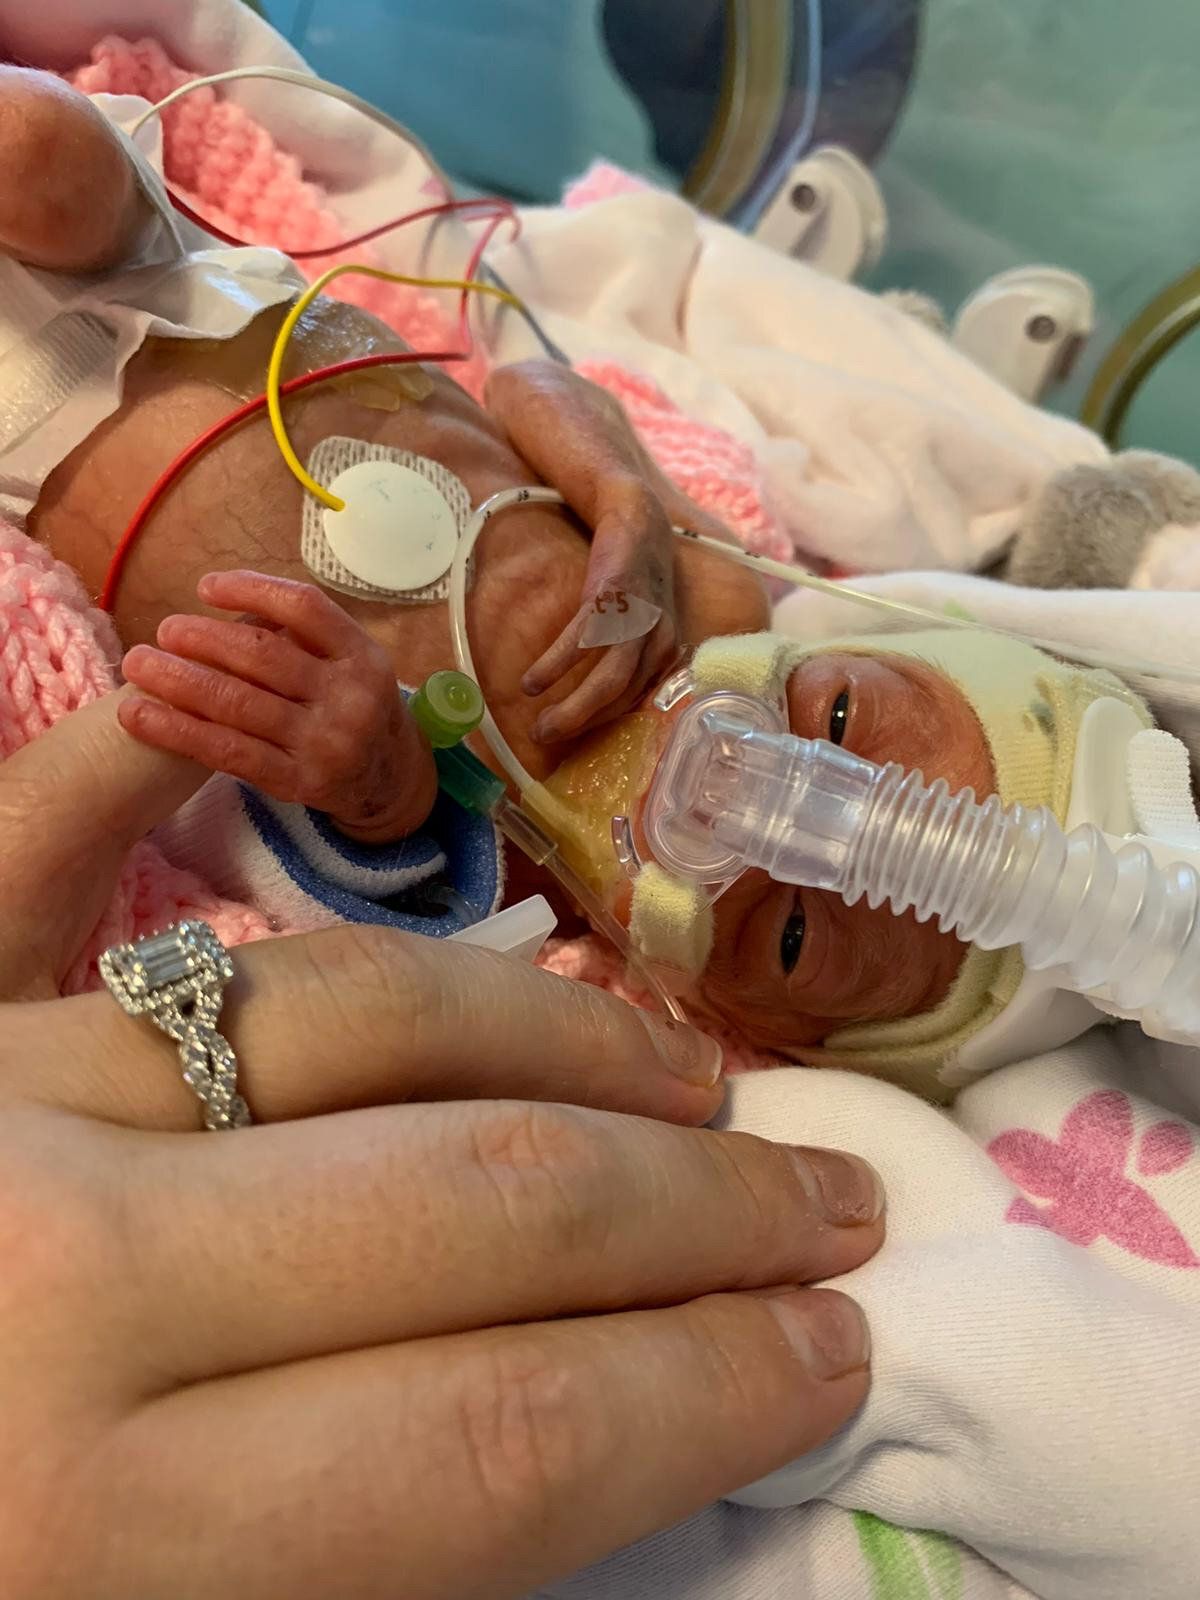 Premature Baby Who Weighed Less Than 1kg When Born Will Get To Experience Her First Christmas